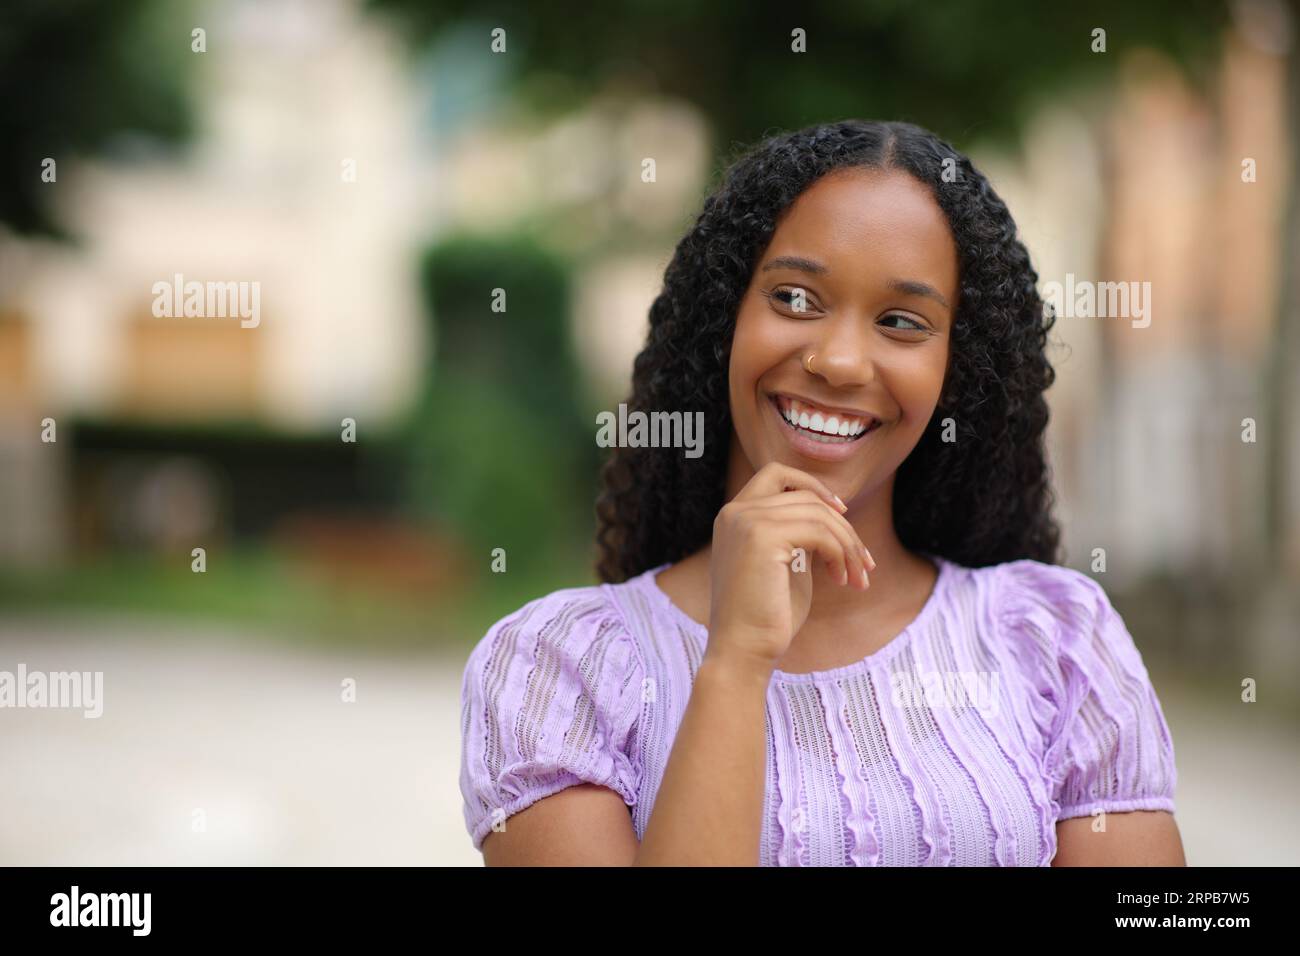 Front view portrait of a happy black woman thinking looking at side in the street Stock Photo